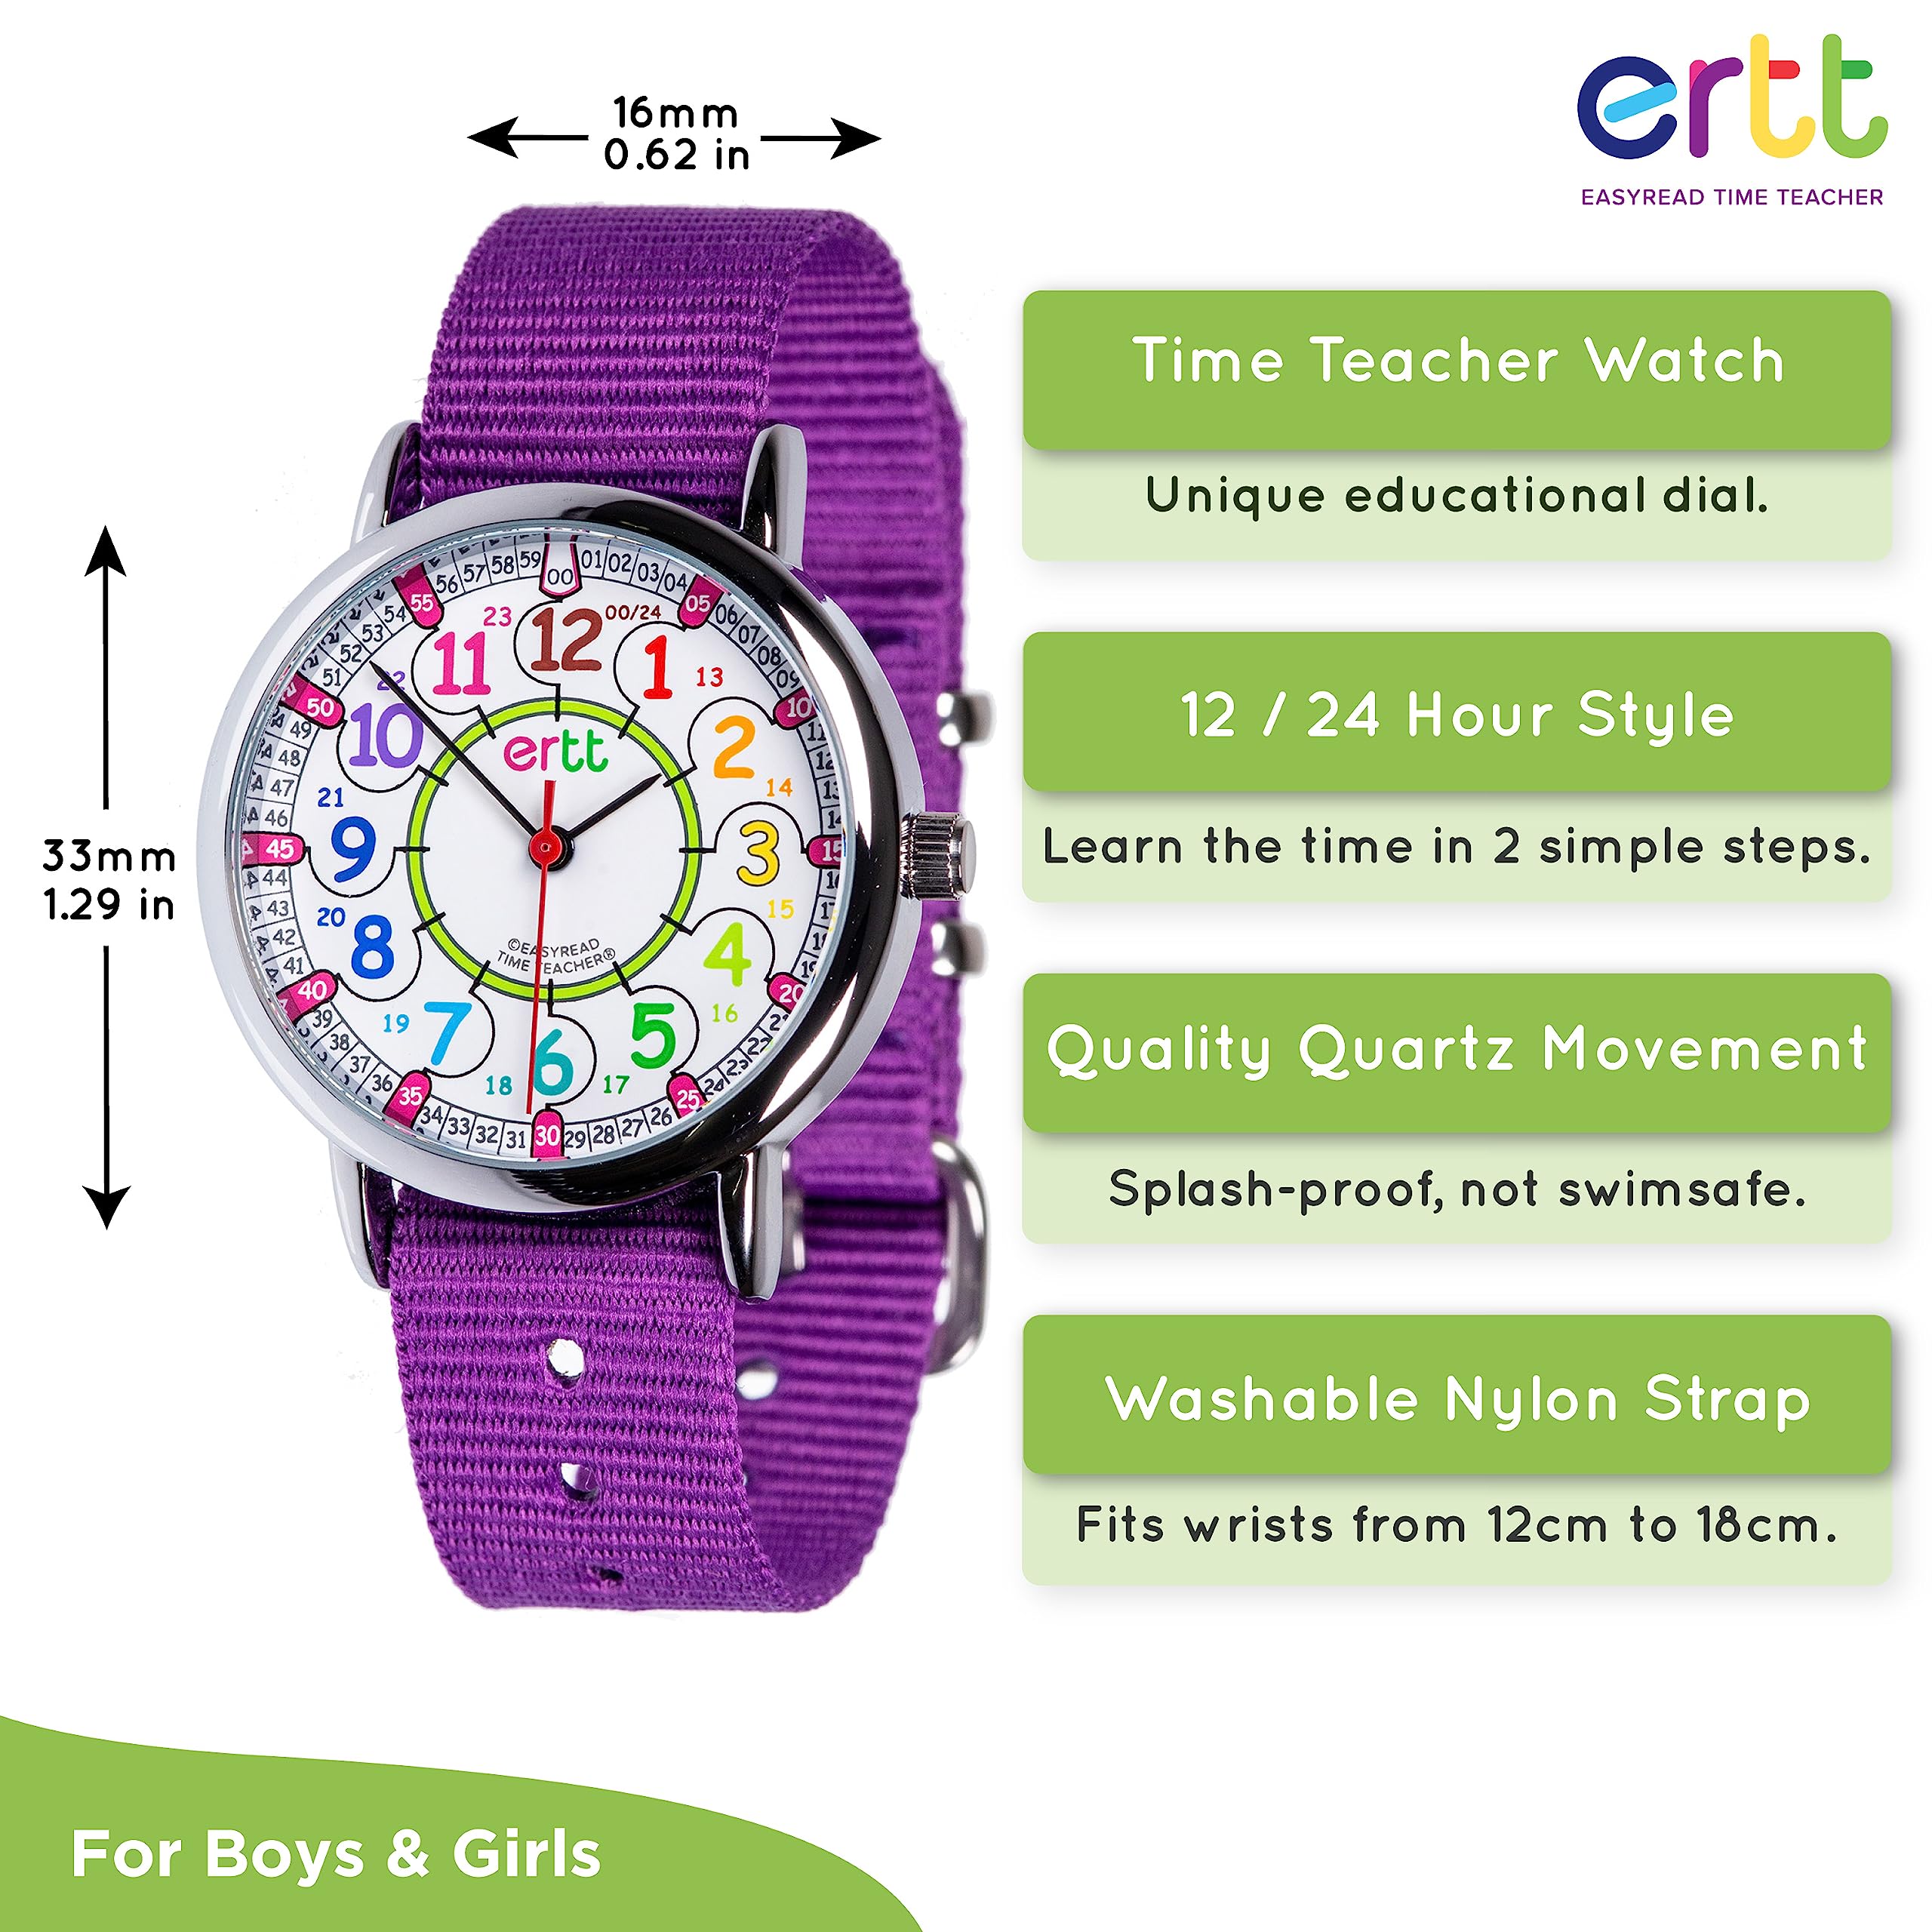 EasyRead Time Teacher Kids Watch - Back to School Gift - Girls & Boys Watches for Kids - Analog Teaching Watch - Tell The Time Childrens Watch - 2 Step Time Teacher Watch - Easy to Read 12-24 Hr Face